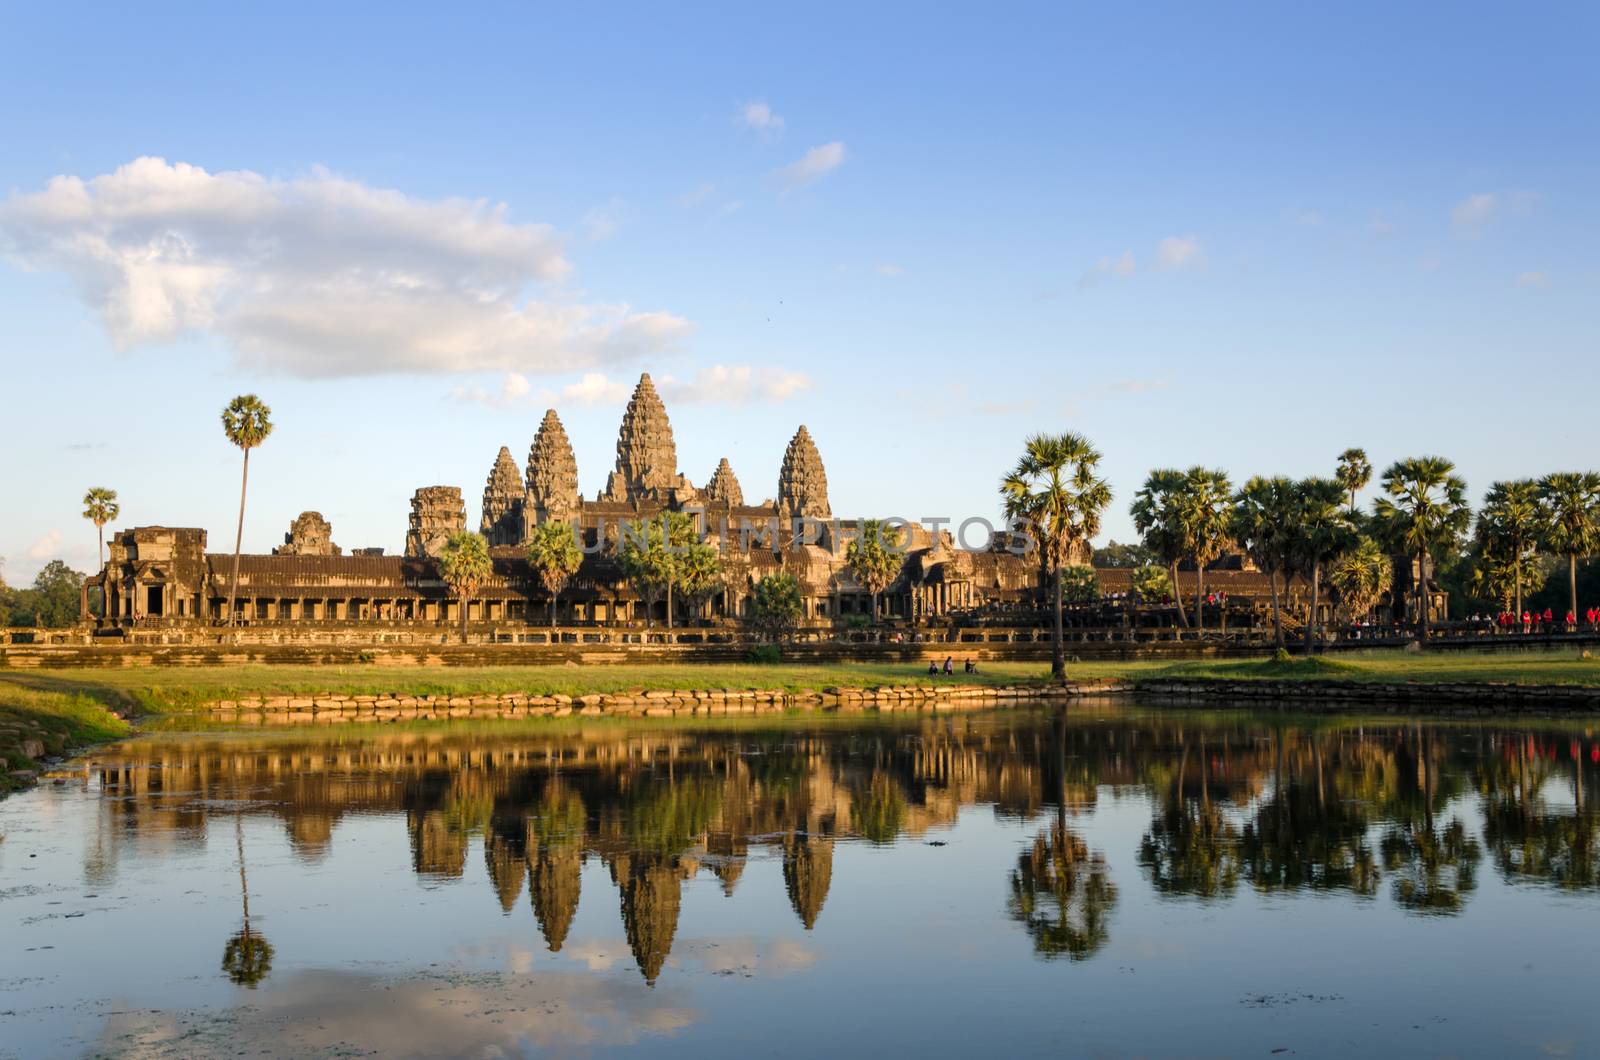 Angkor Wat at sunset with reflection in water in Cambodia